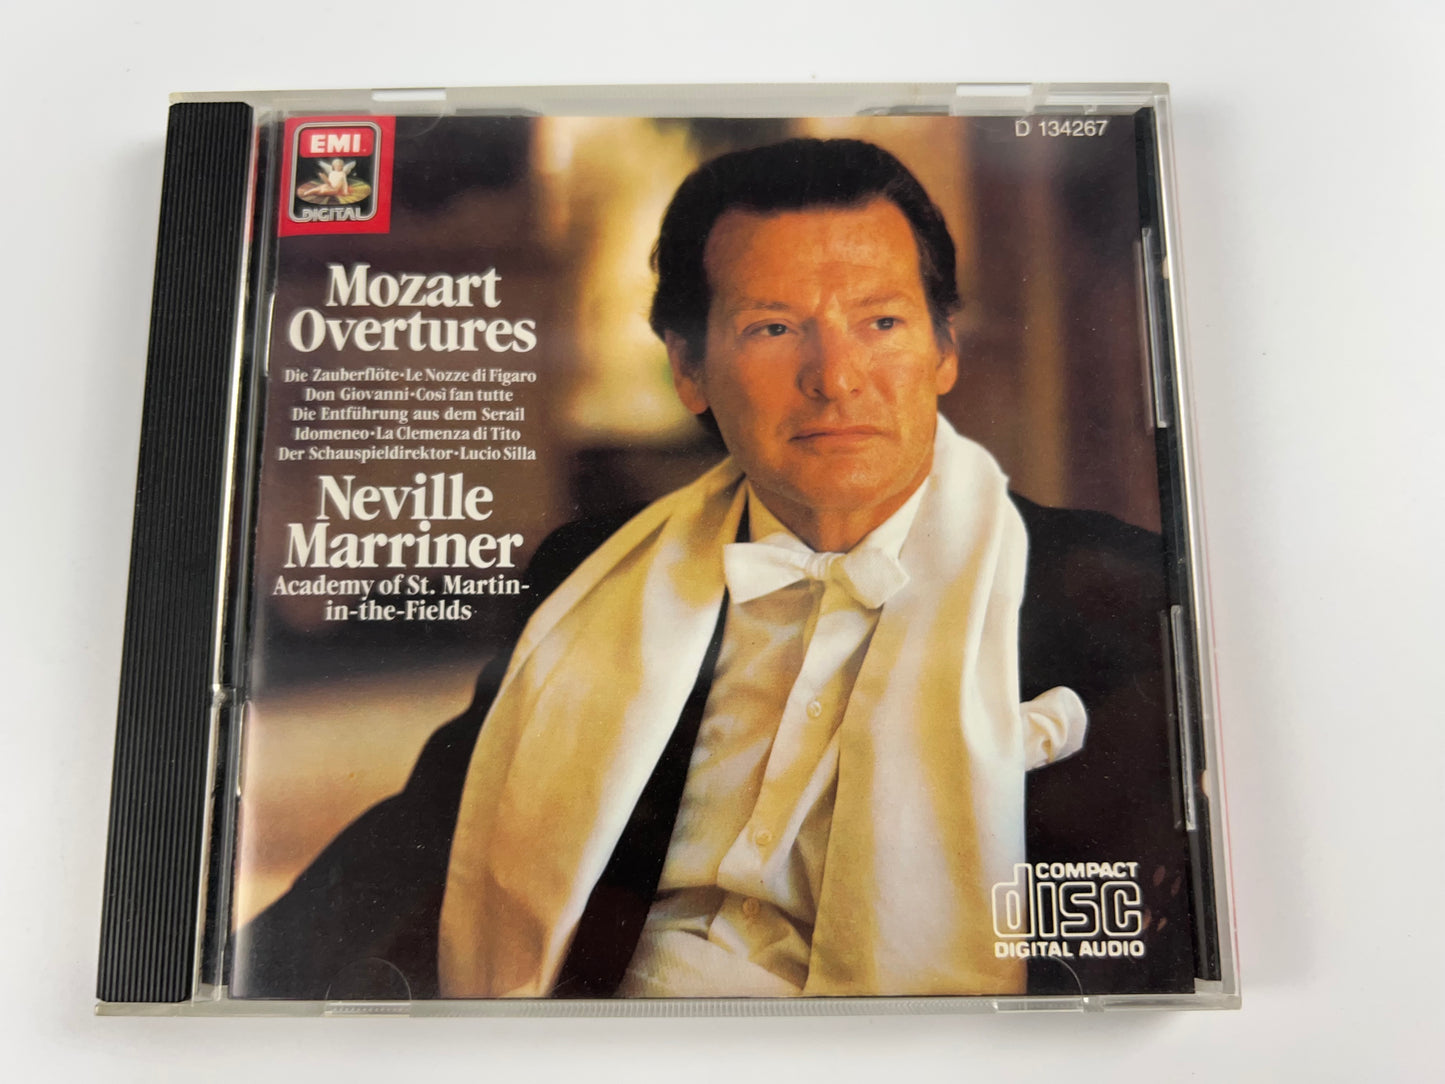 Mozart Overtures Neville Marriner Academy of St. Martin-in-the-Fields Audio CD